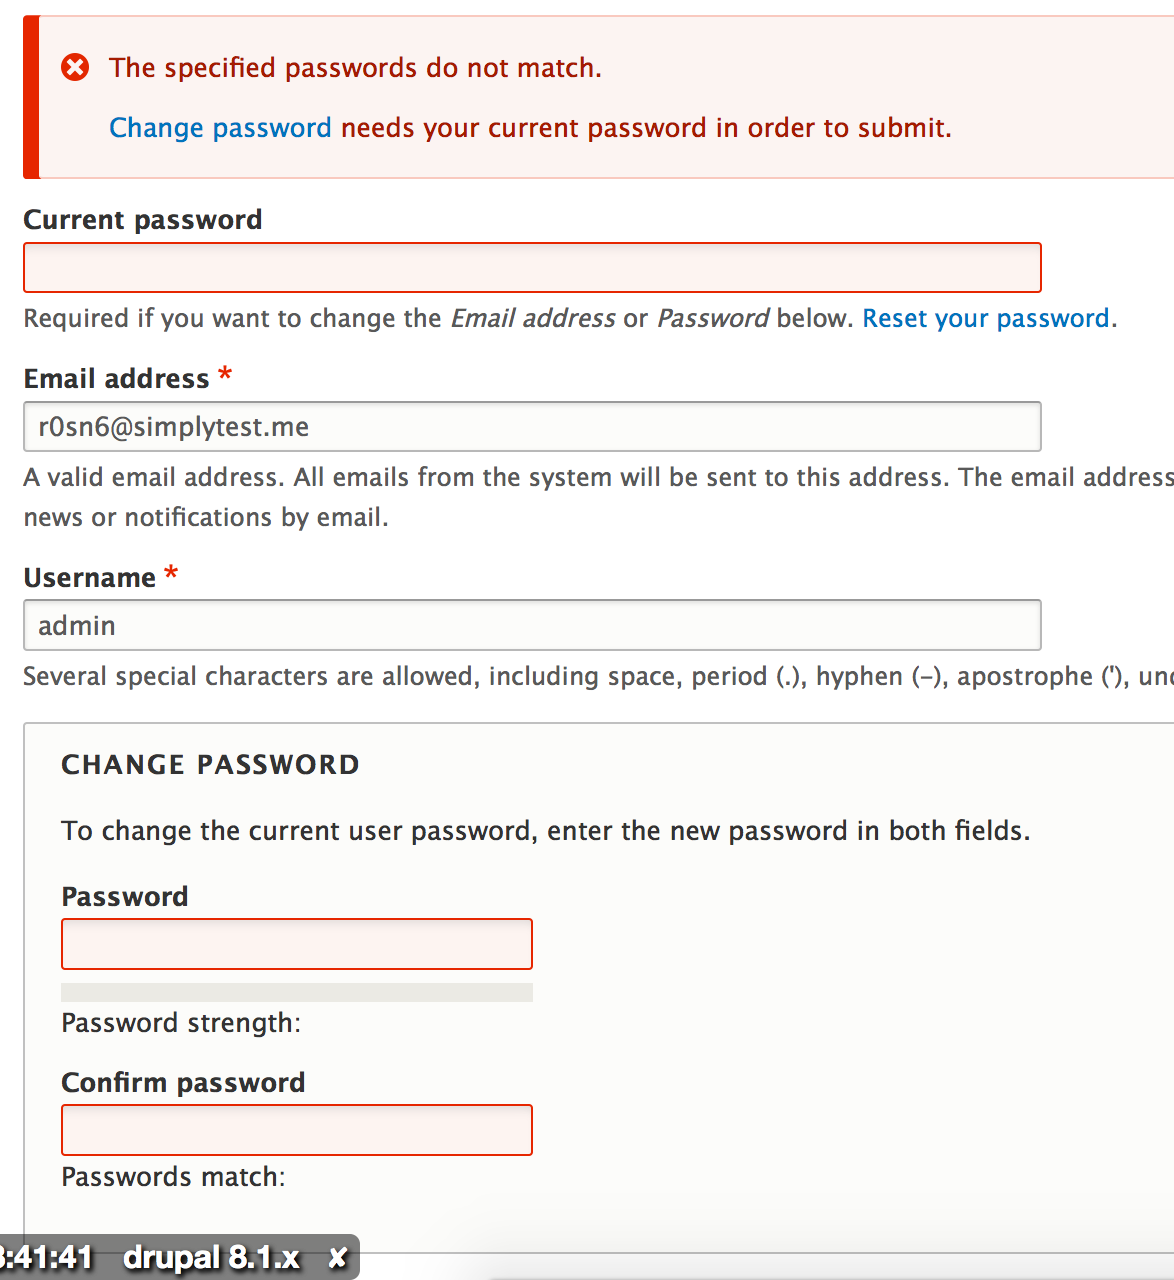 Error Highlighting And Reporting Problems For The Current Password On The User Profile Form Drupal Org